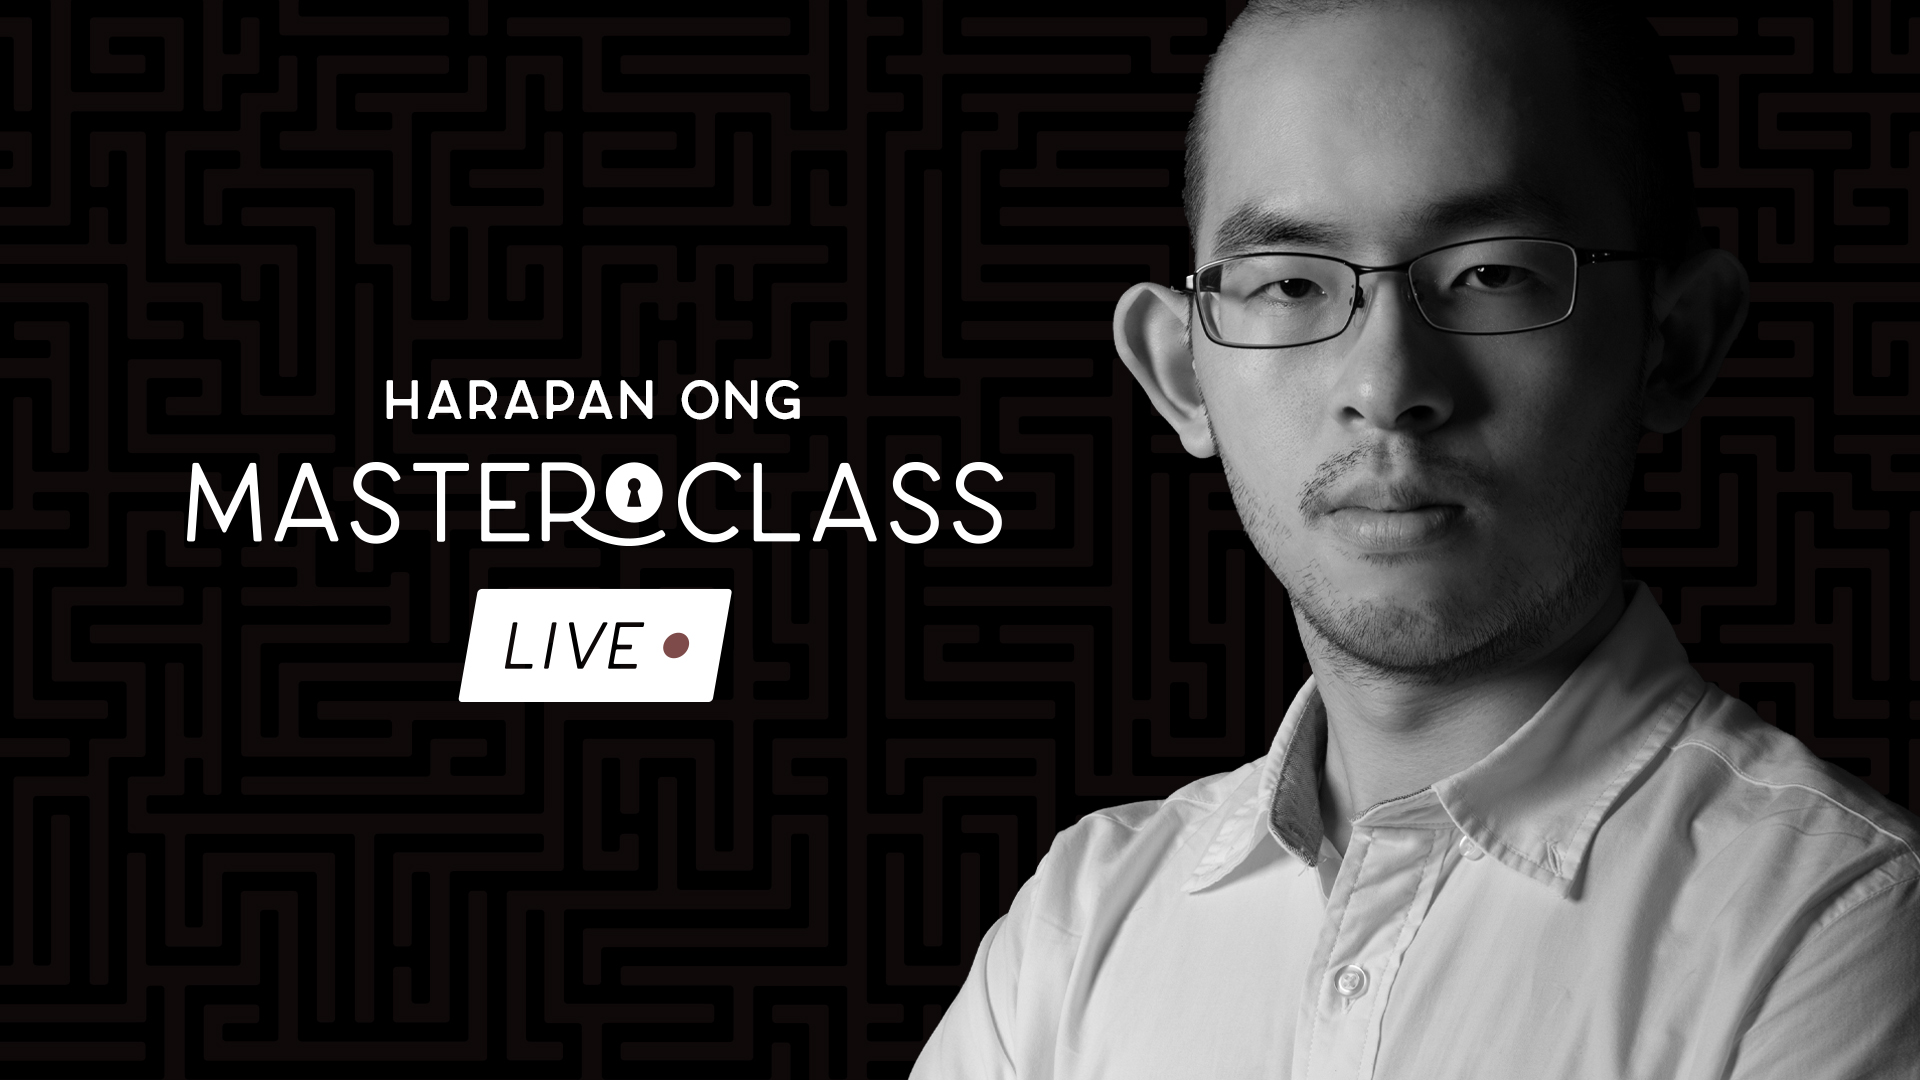 Harapan Ong - Masterclass Live Lecture (Week 1) (MP4 Video Download 1080p FullHD Quality)